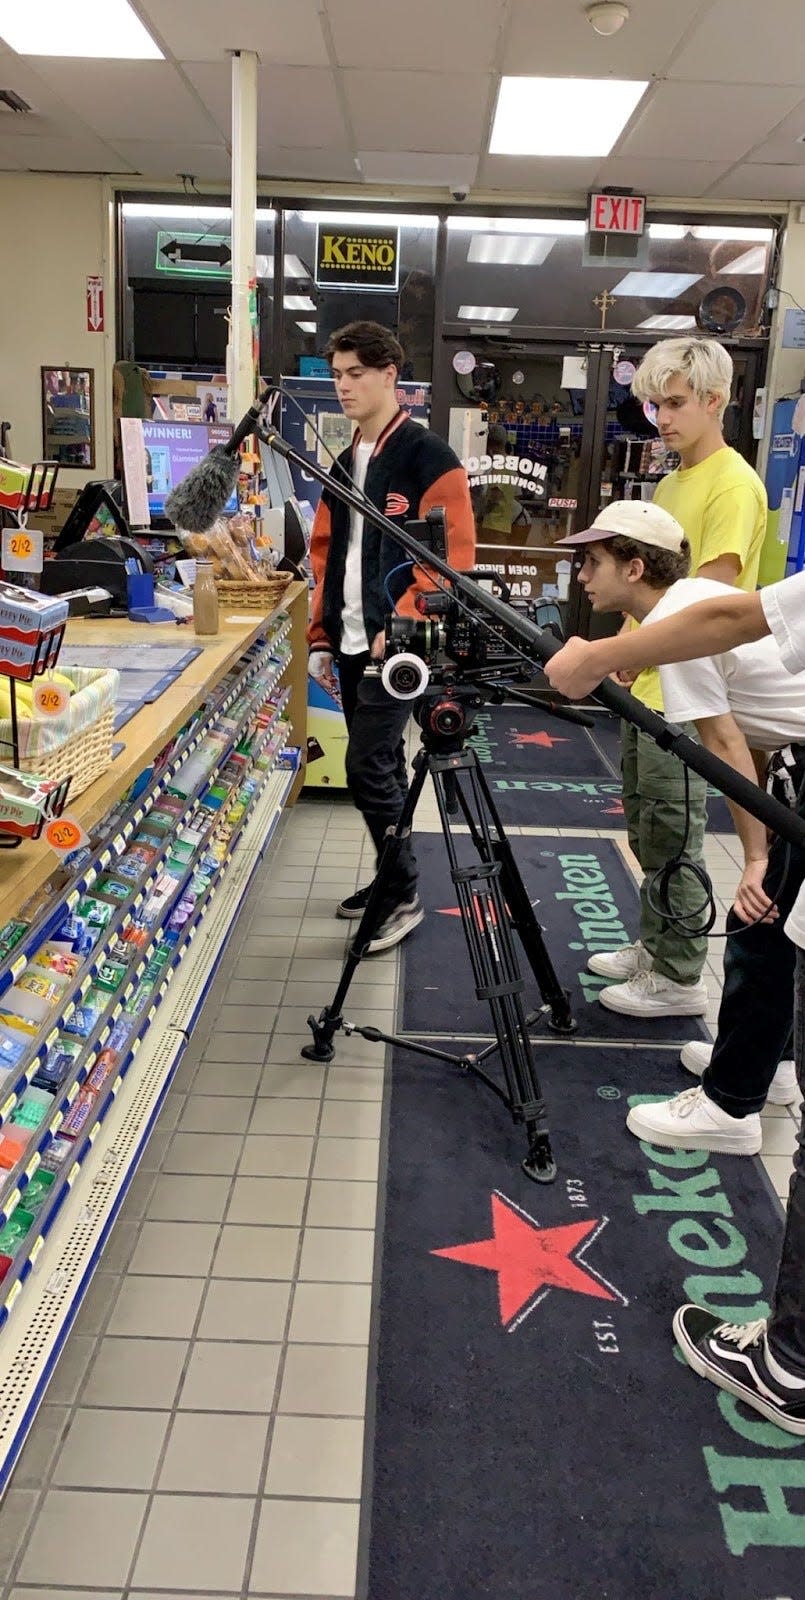 Several scenes from "Blood Moon" were shot in Framingham, including at Nobscot Convenience.